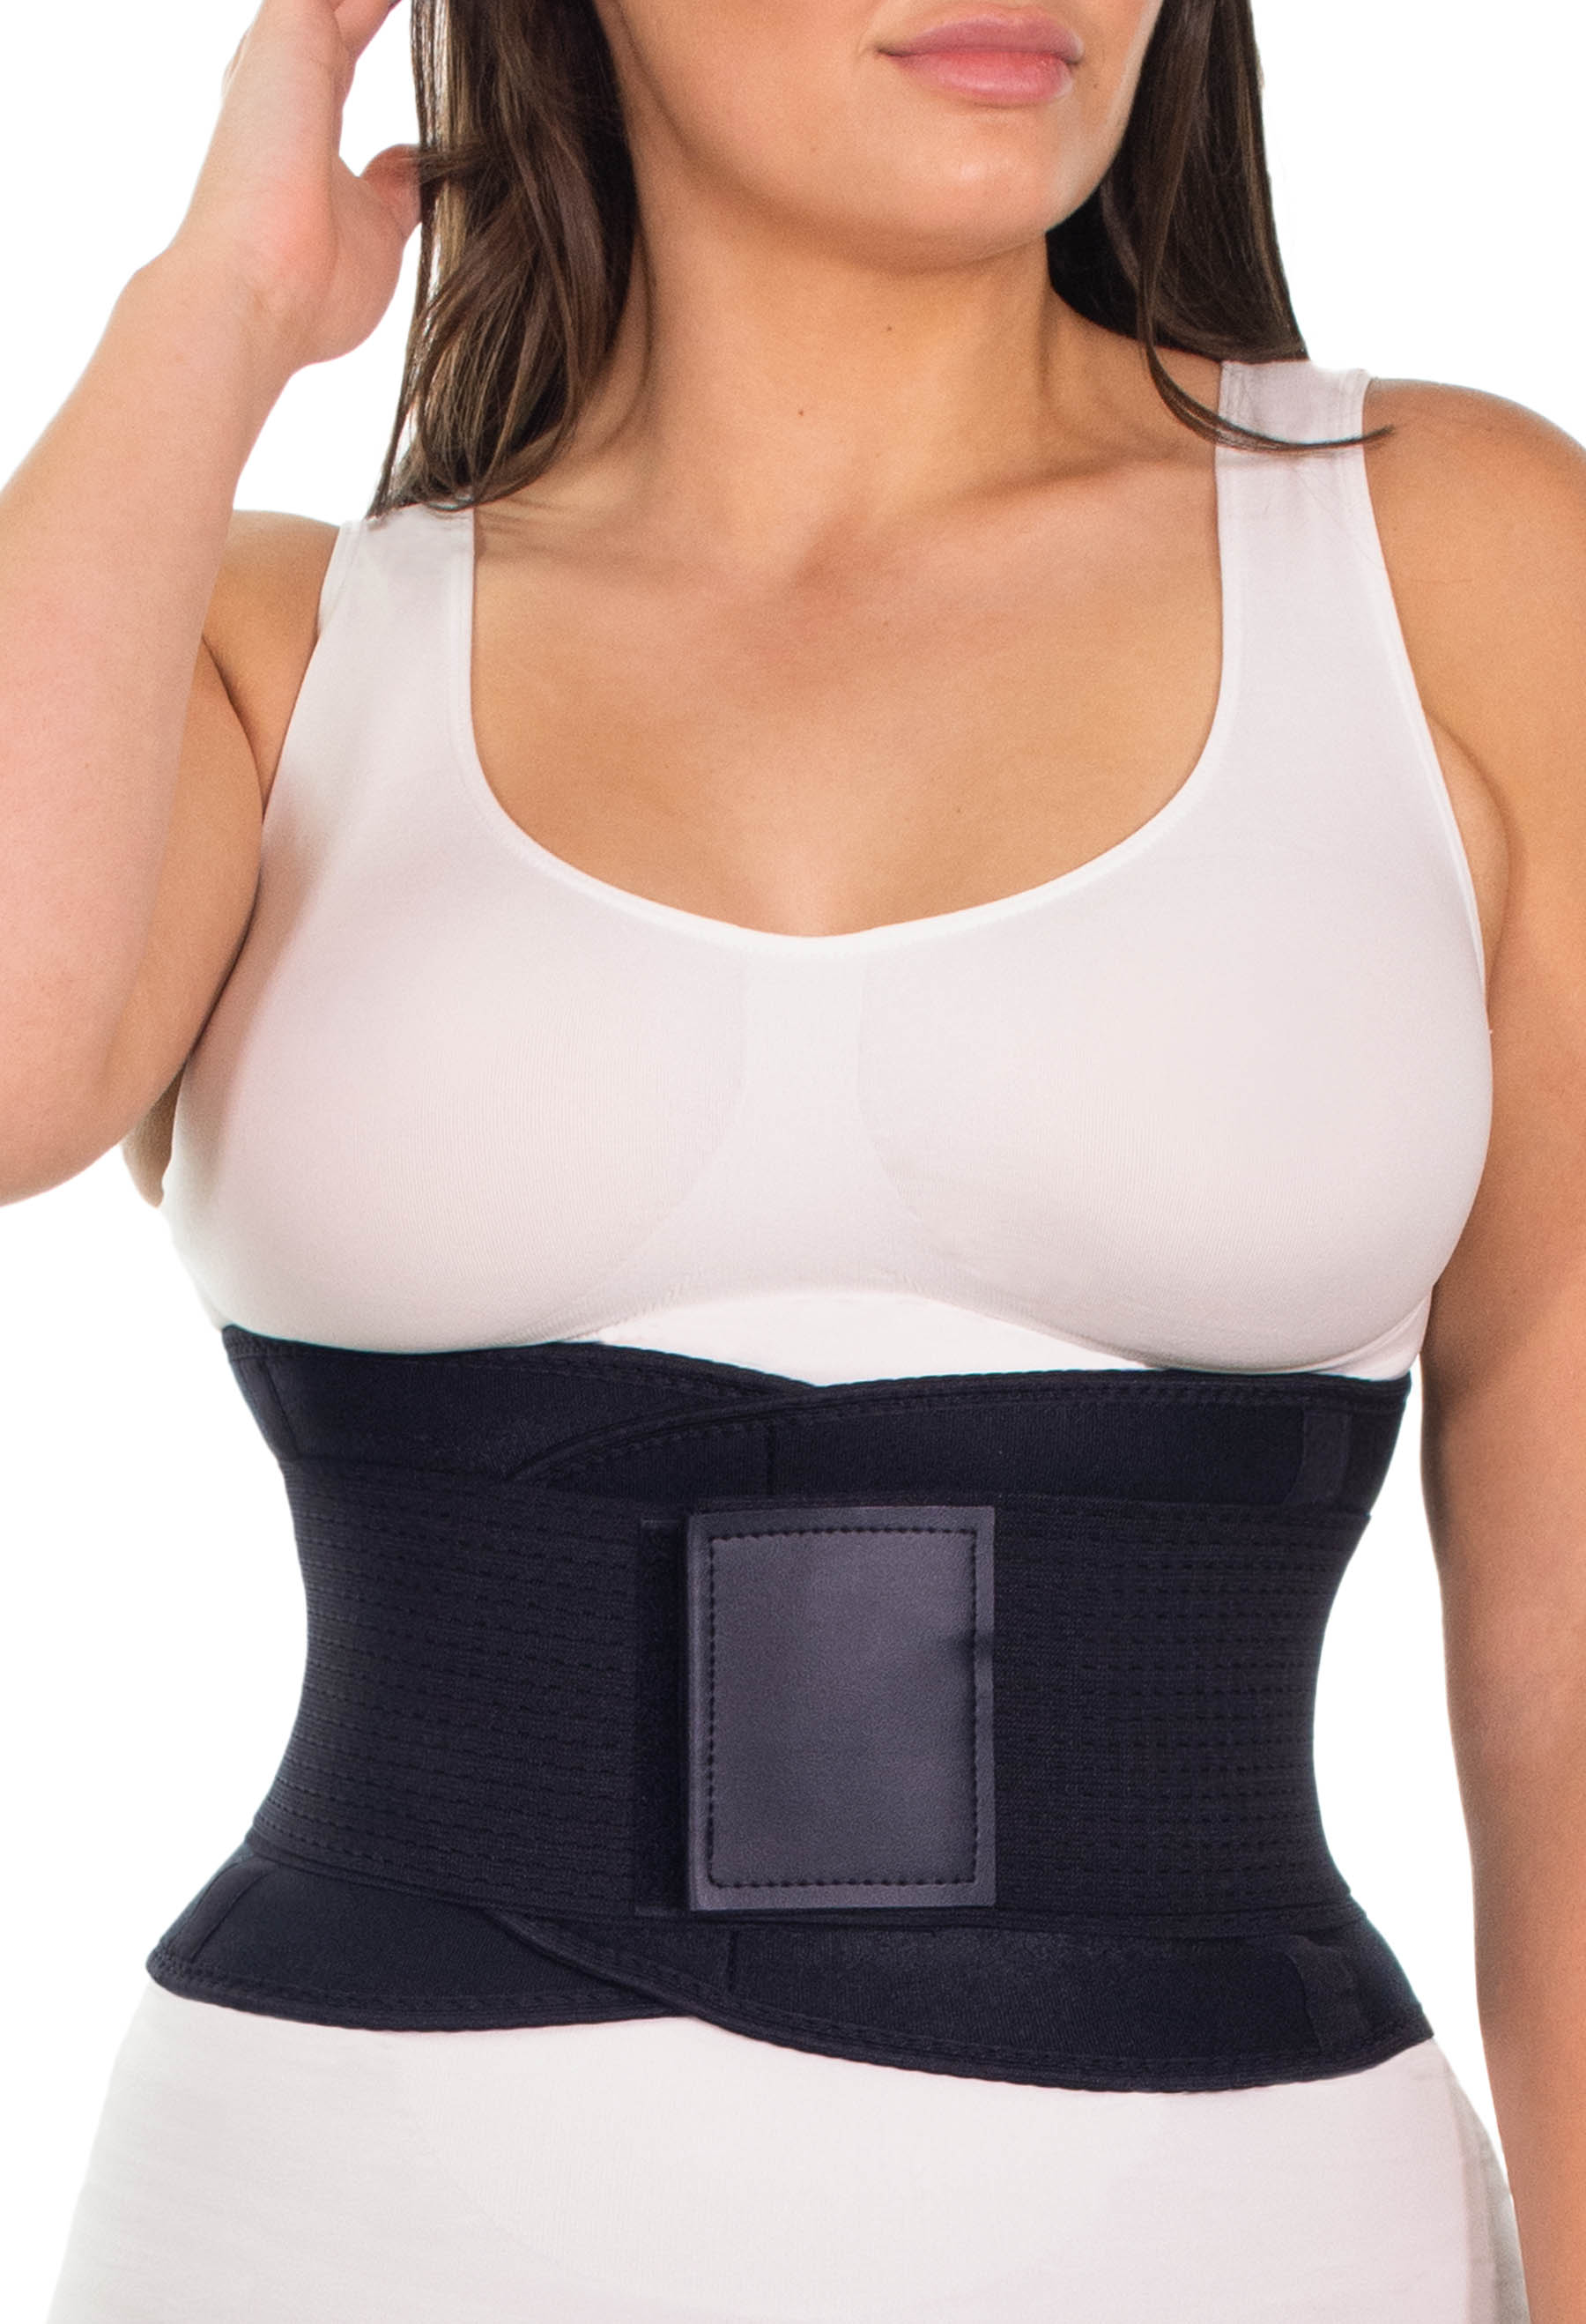 waist trainer workout - Exercise